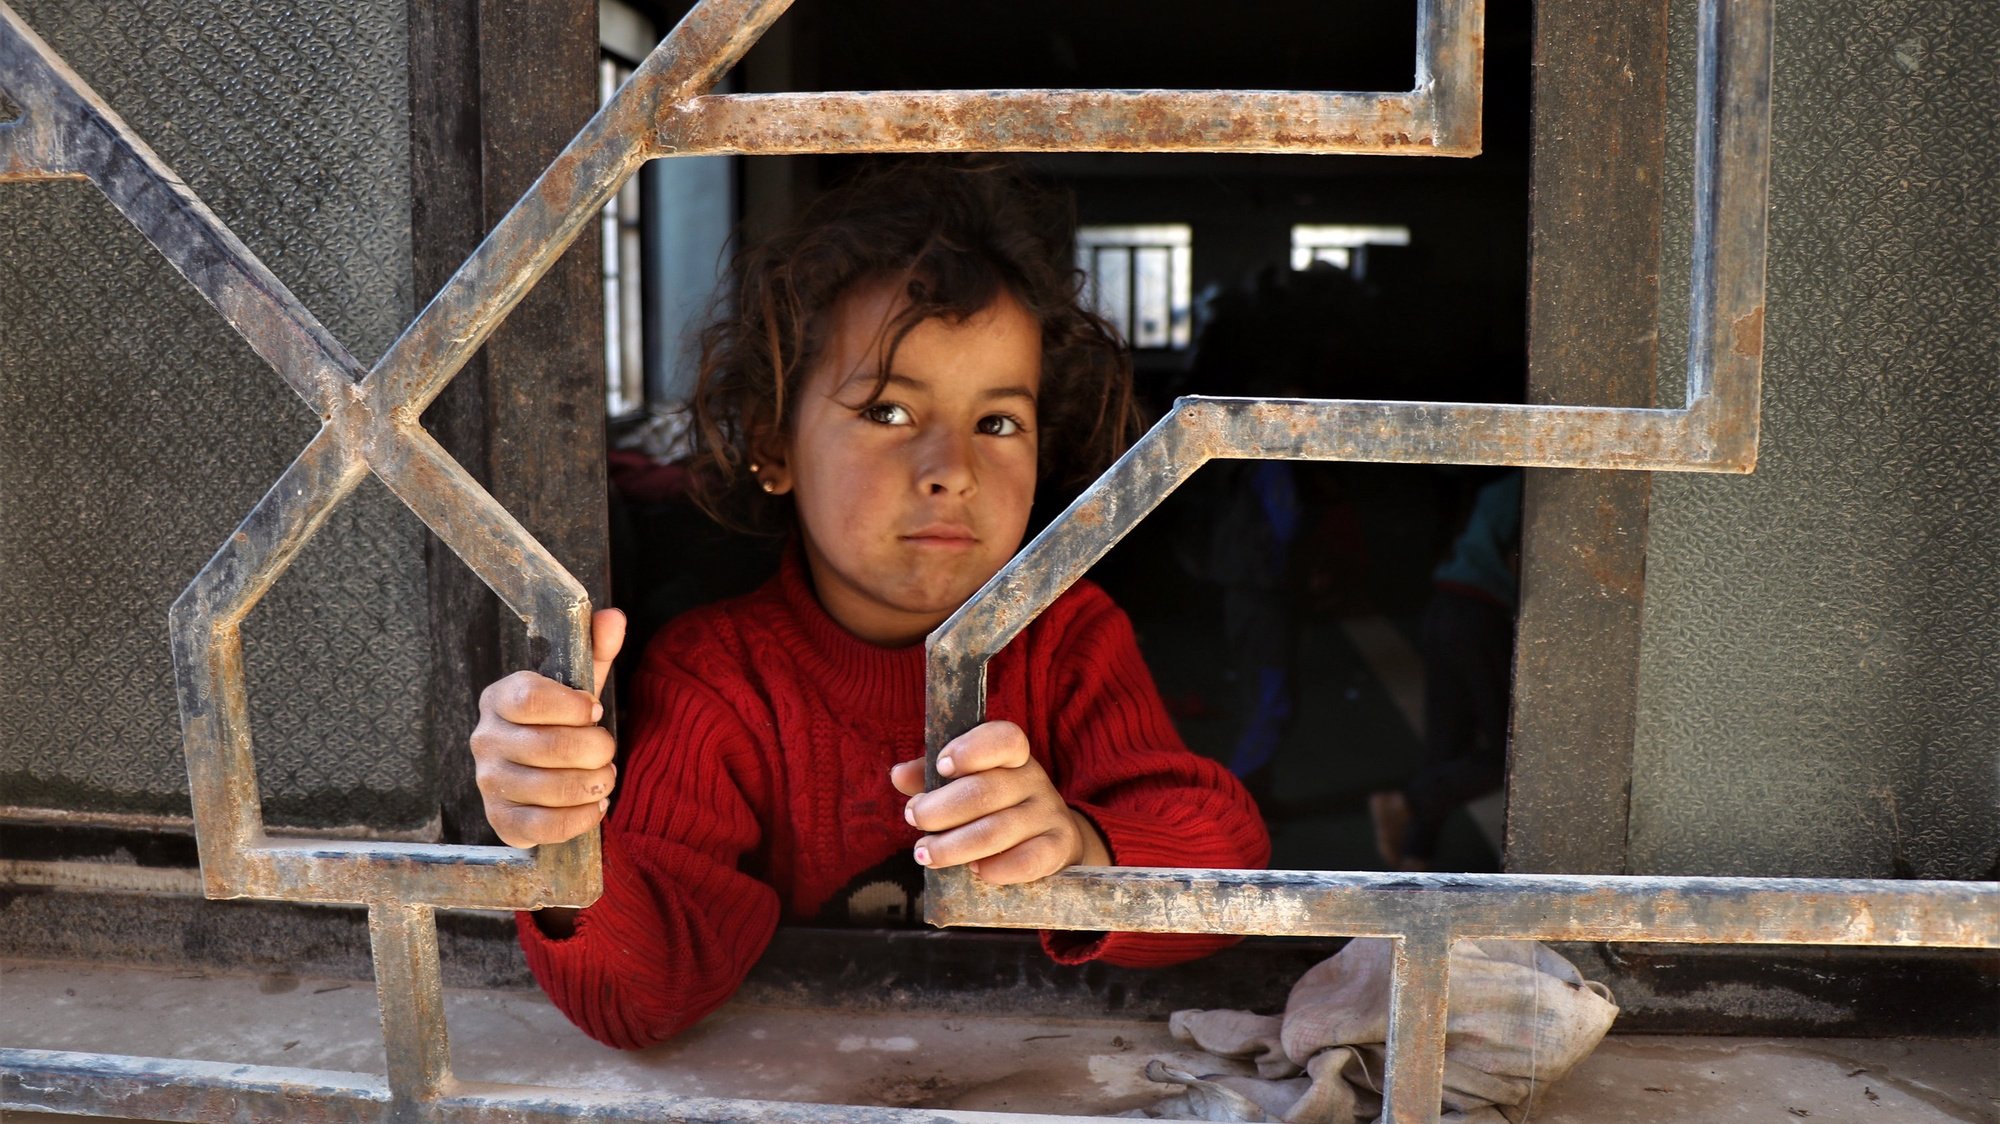 epa09708901 A displaced Syrian little girl looks through a window as she waits with her family at a mosque in Hasaka town, northeastern of Syria, 25 January 2022. According to the United Nations, around 45,000 people fled their homes in Hasaka city, due to the ongoing clashes between the Fighters of the Syrian democratic forces (SDF) and fighters of the Islamic State, following IS fighters attacking Ghweran and al-Shaddadi prisons in al-Hasaka on 20 January 2022, to break thousands of its affiliates out of the prison.  EPA/AHMED MARDNLI